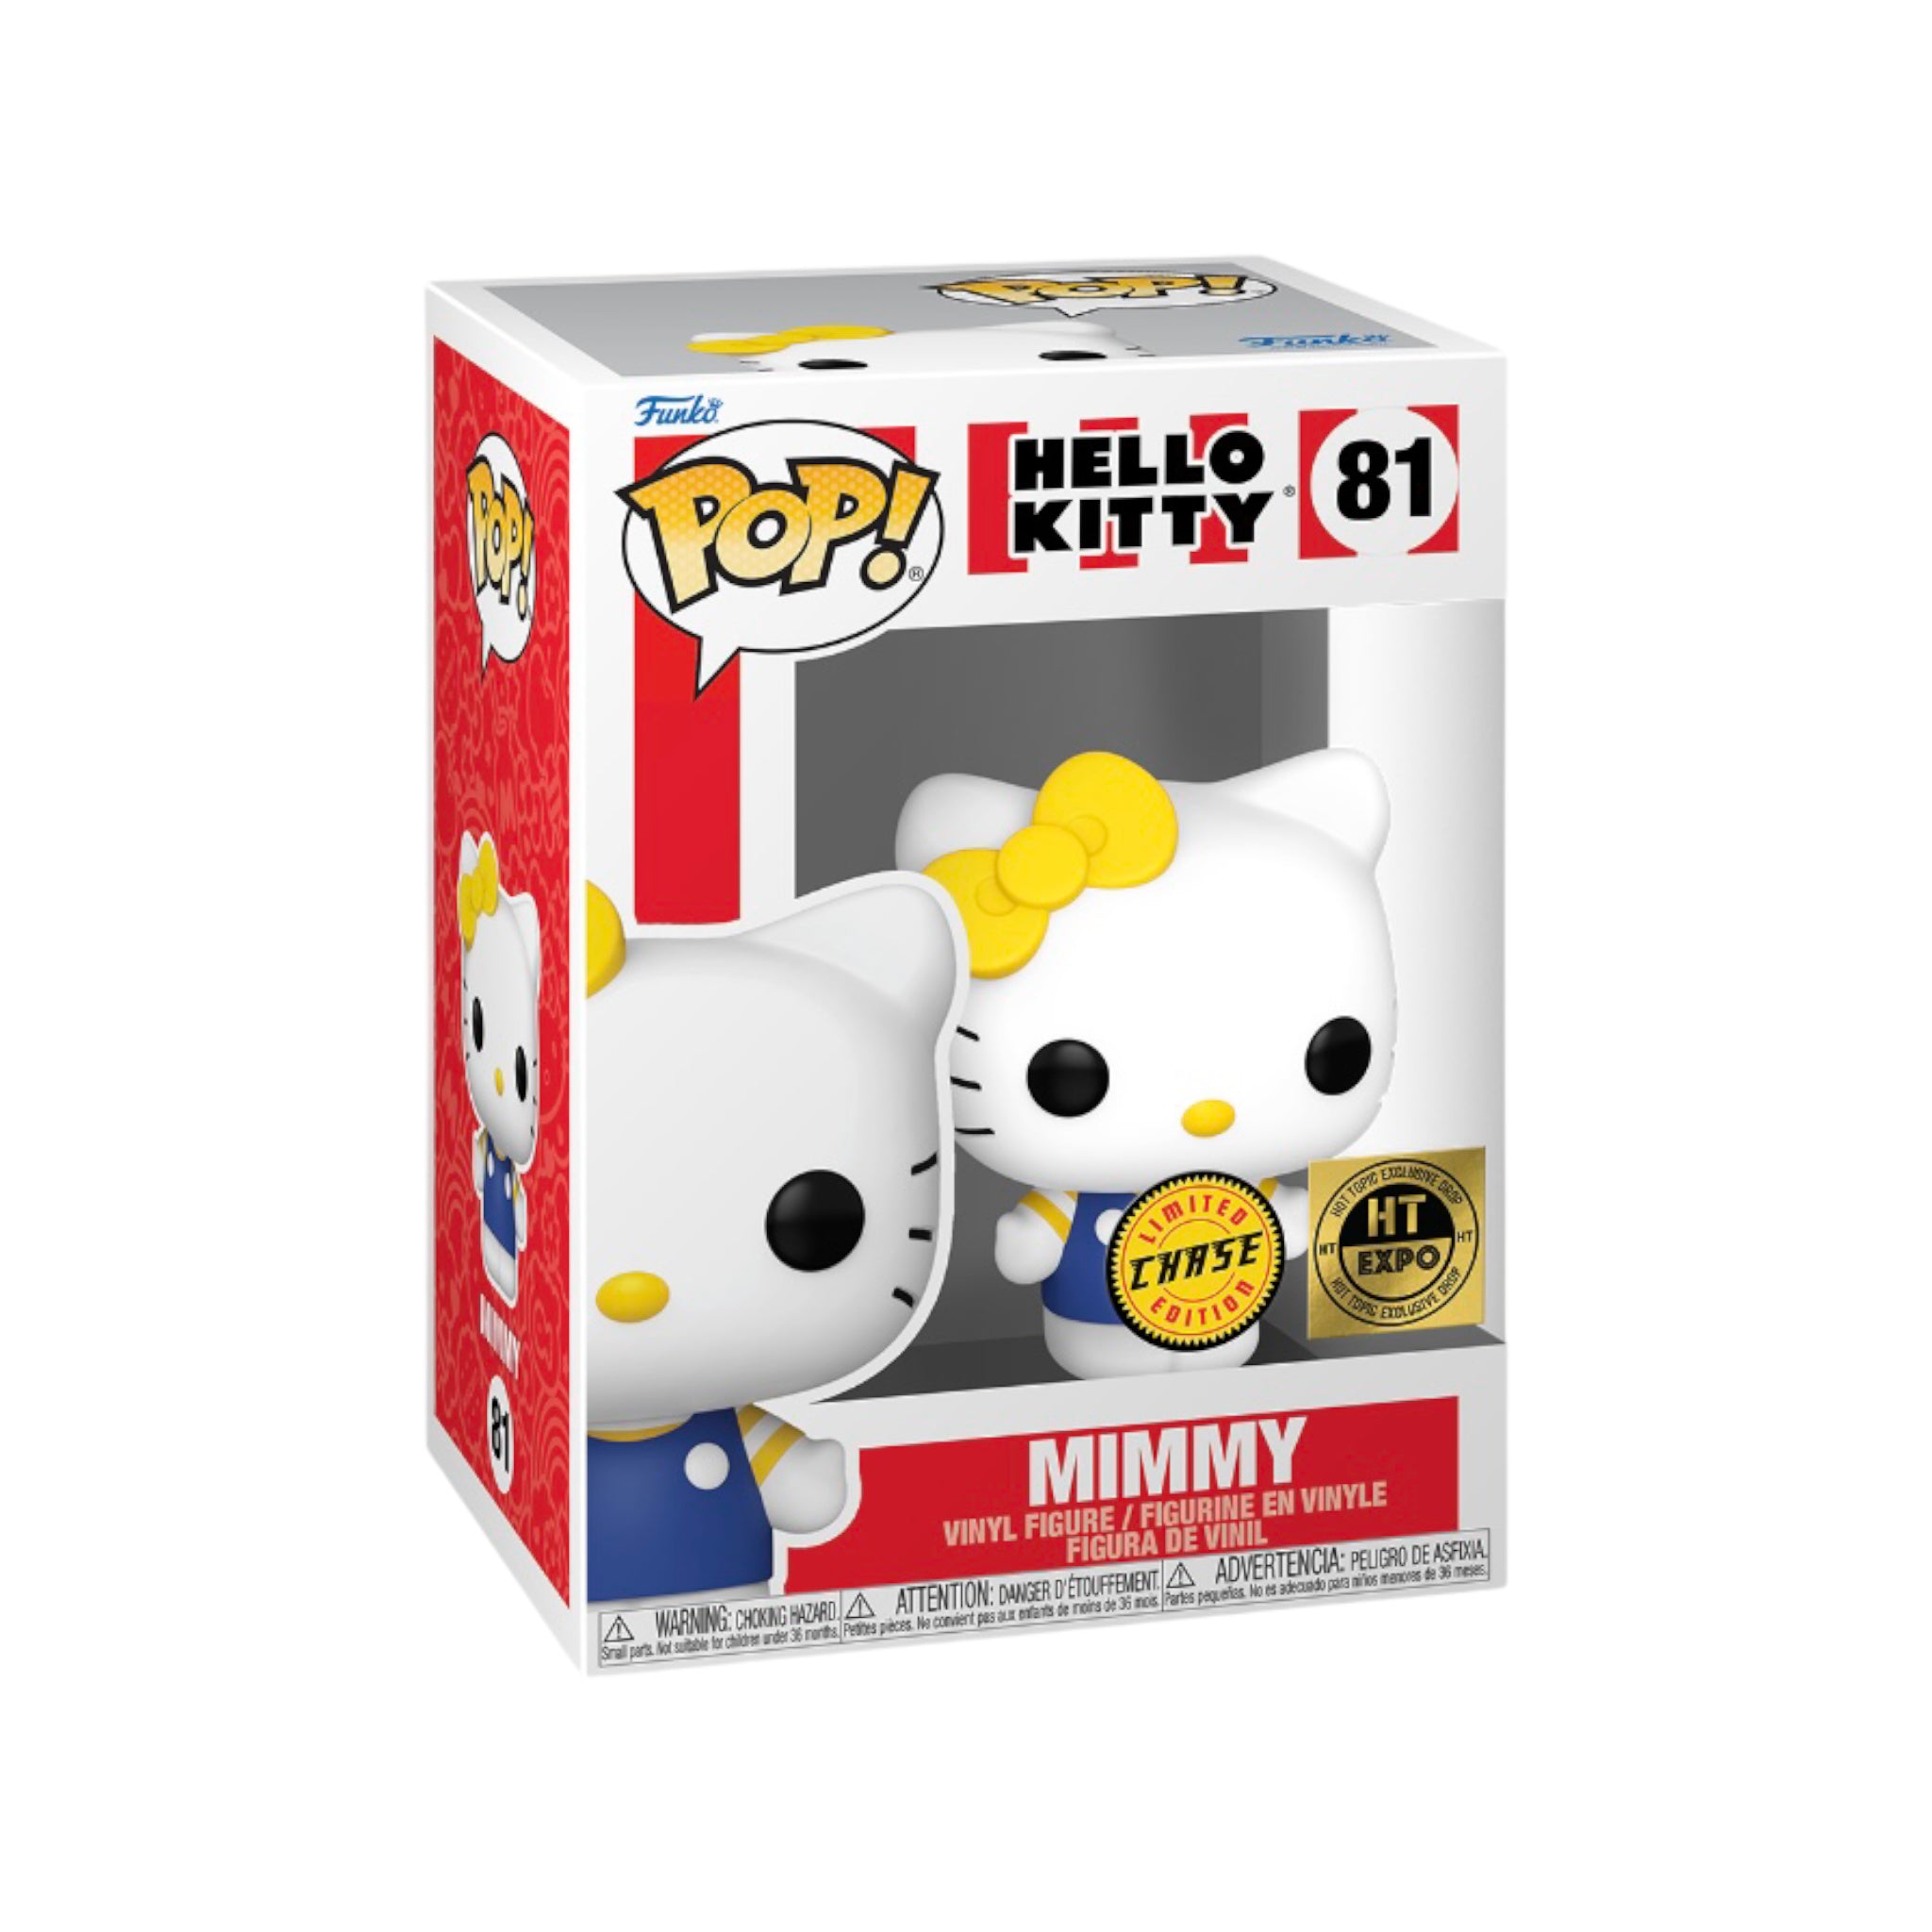 Mimmy #81 (Chase) Funko Pop! - Hello Kitty - Hot Topic Expo Exclusive